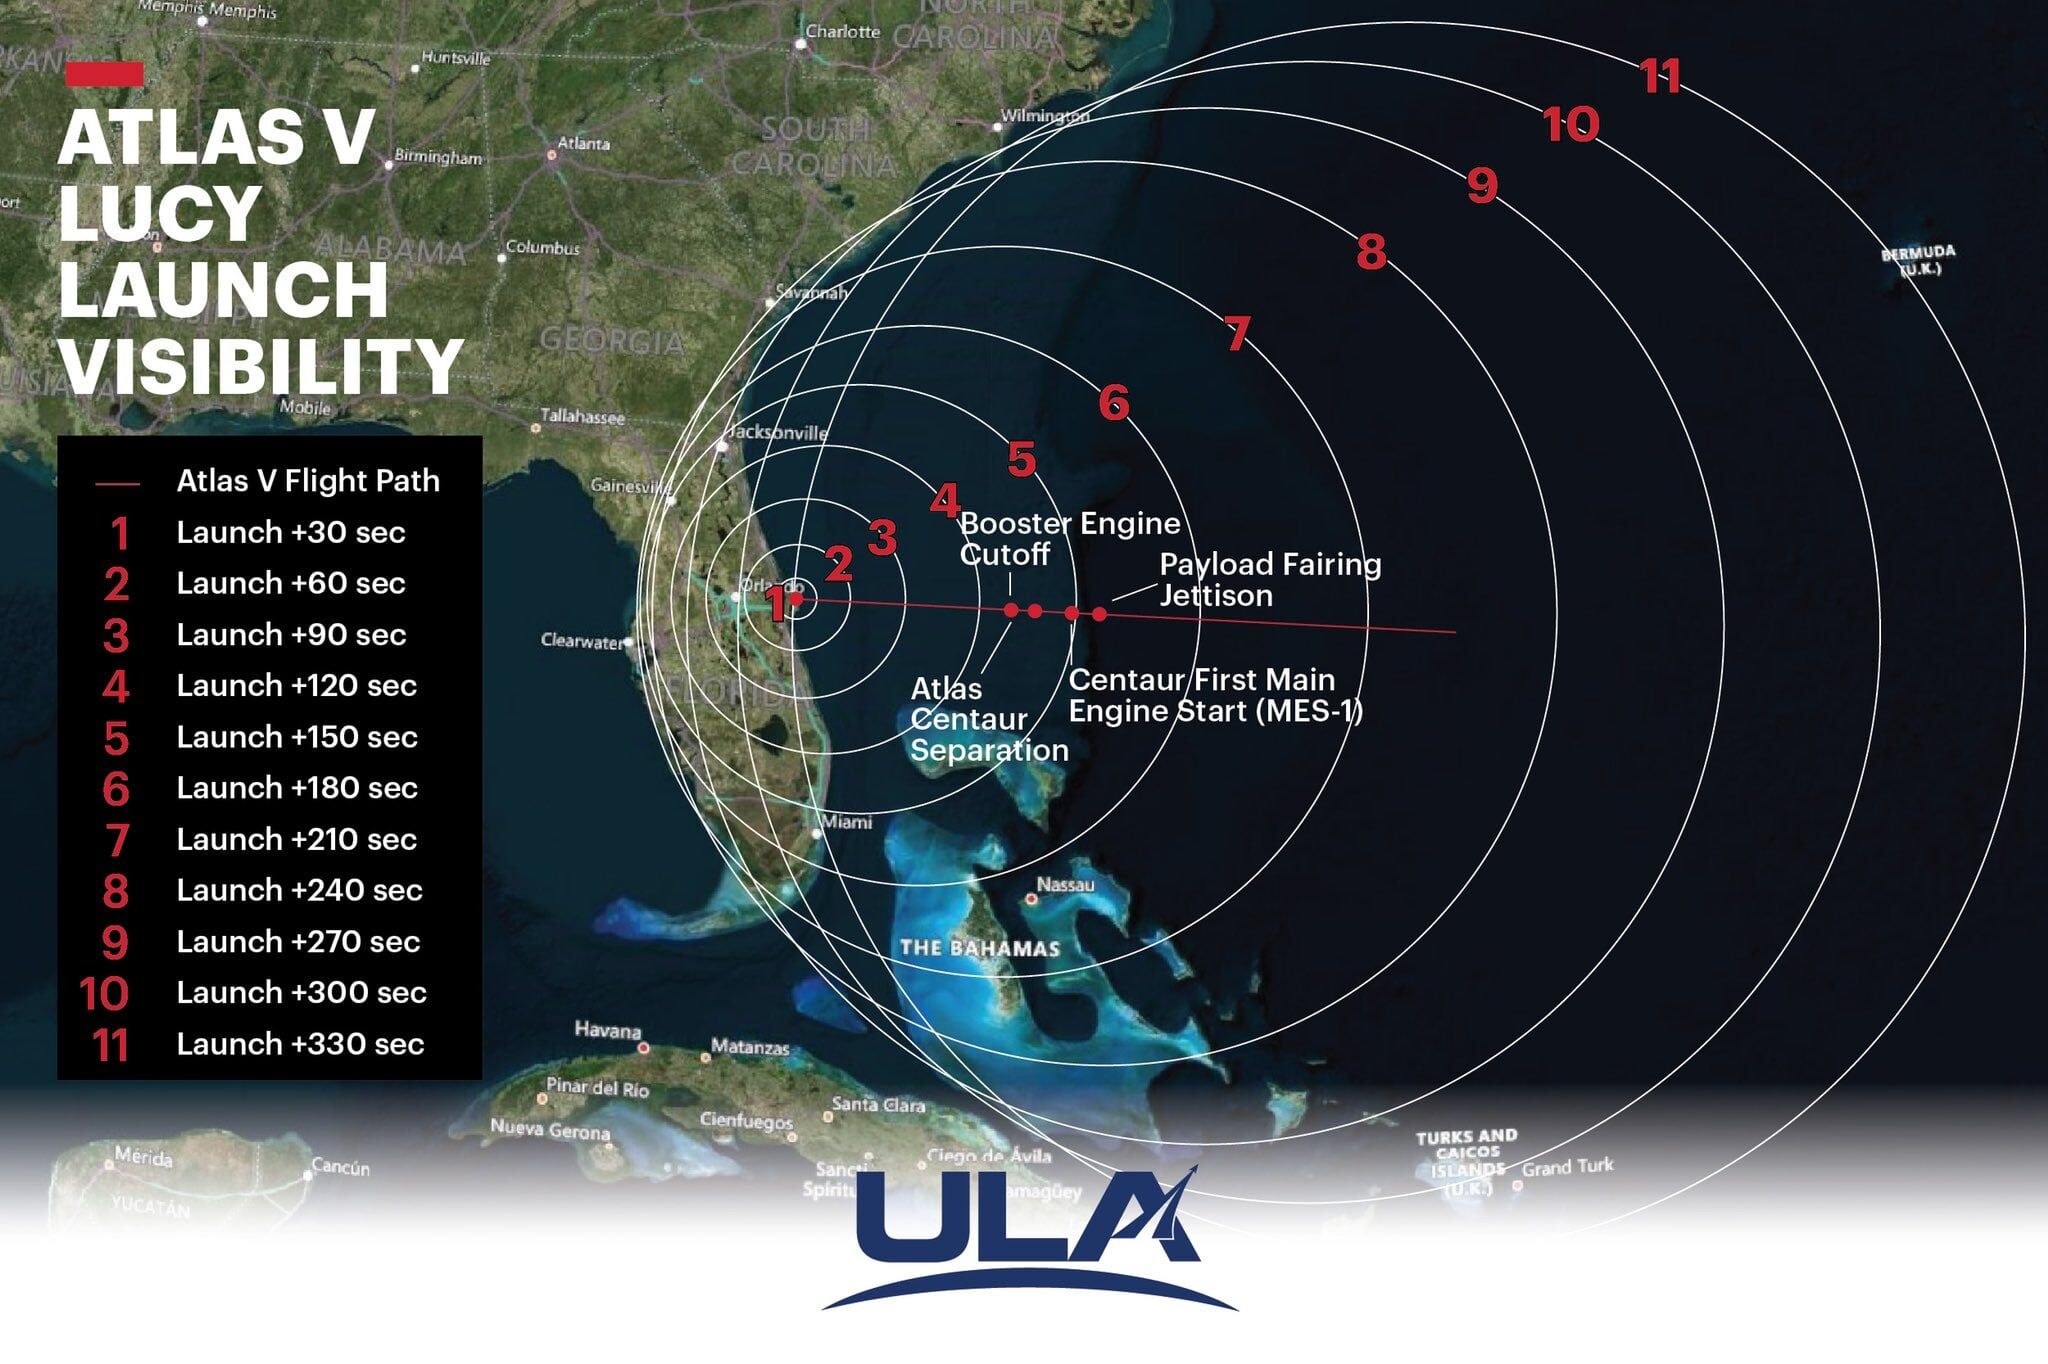 The weather looks good for viewing the ULA Atlas V Lucy rocket launch